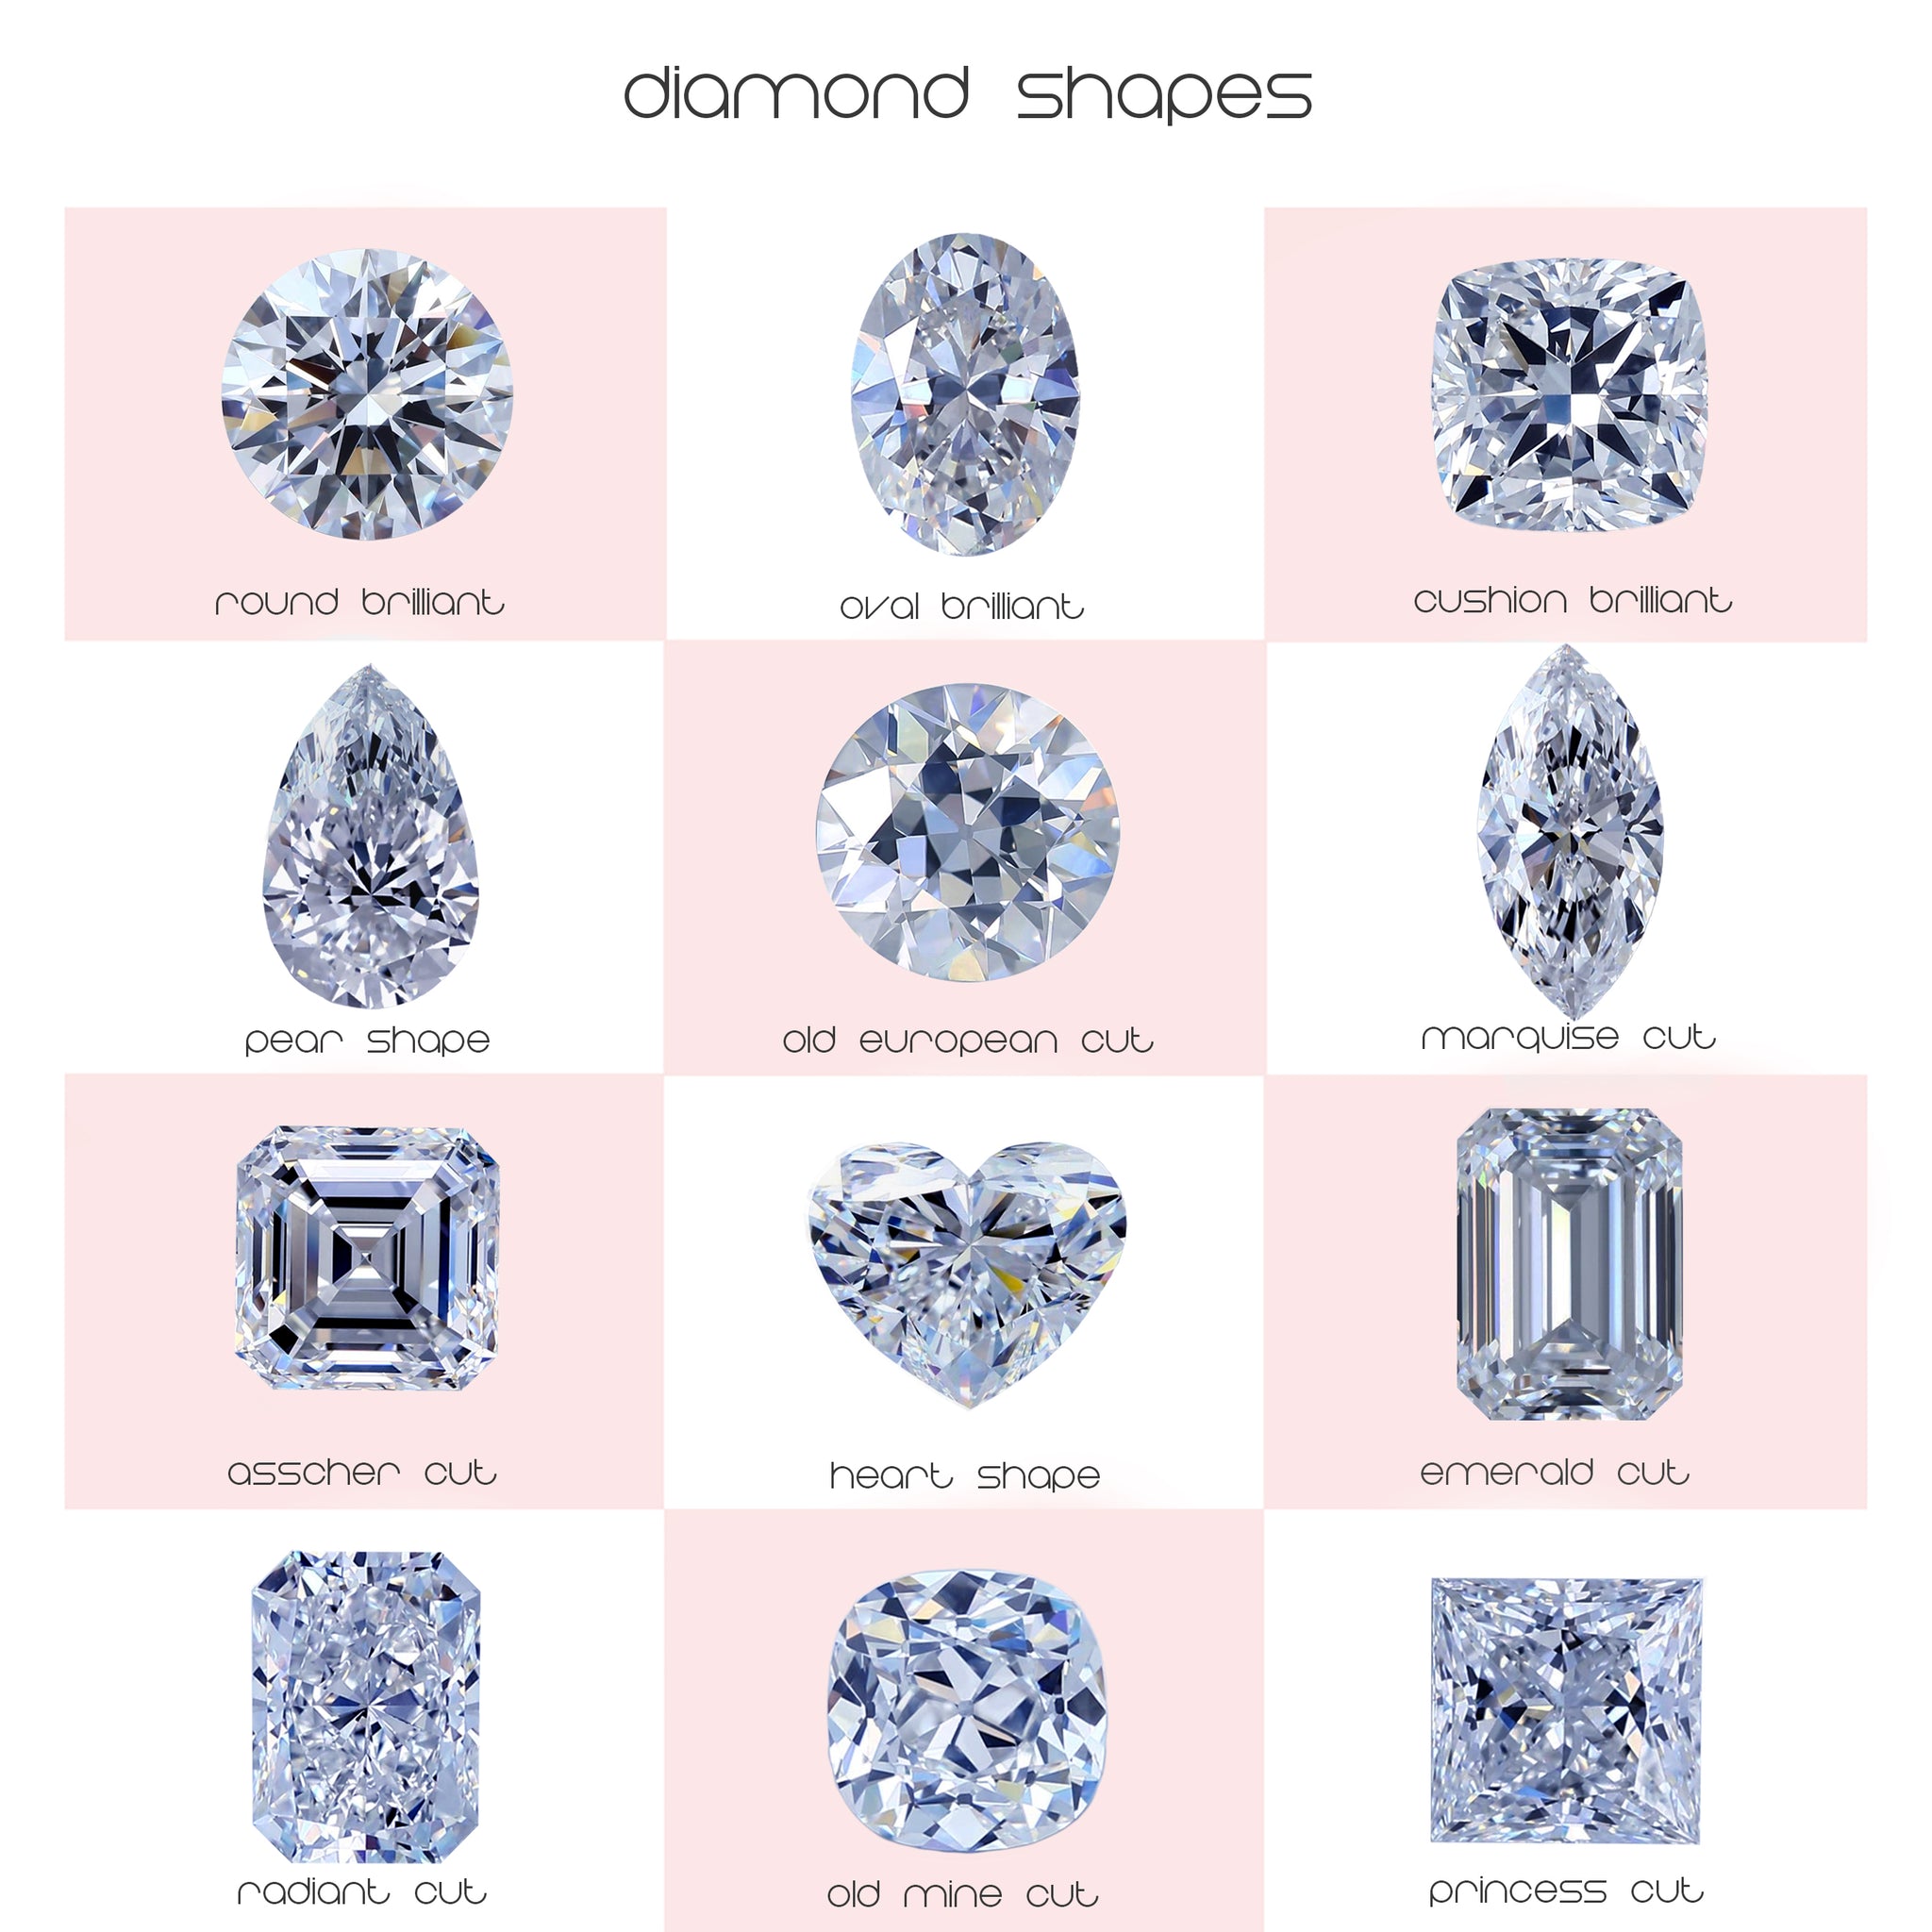 the history and meaning behind diamond shapes